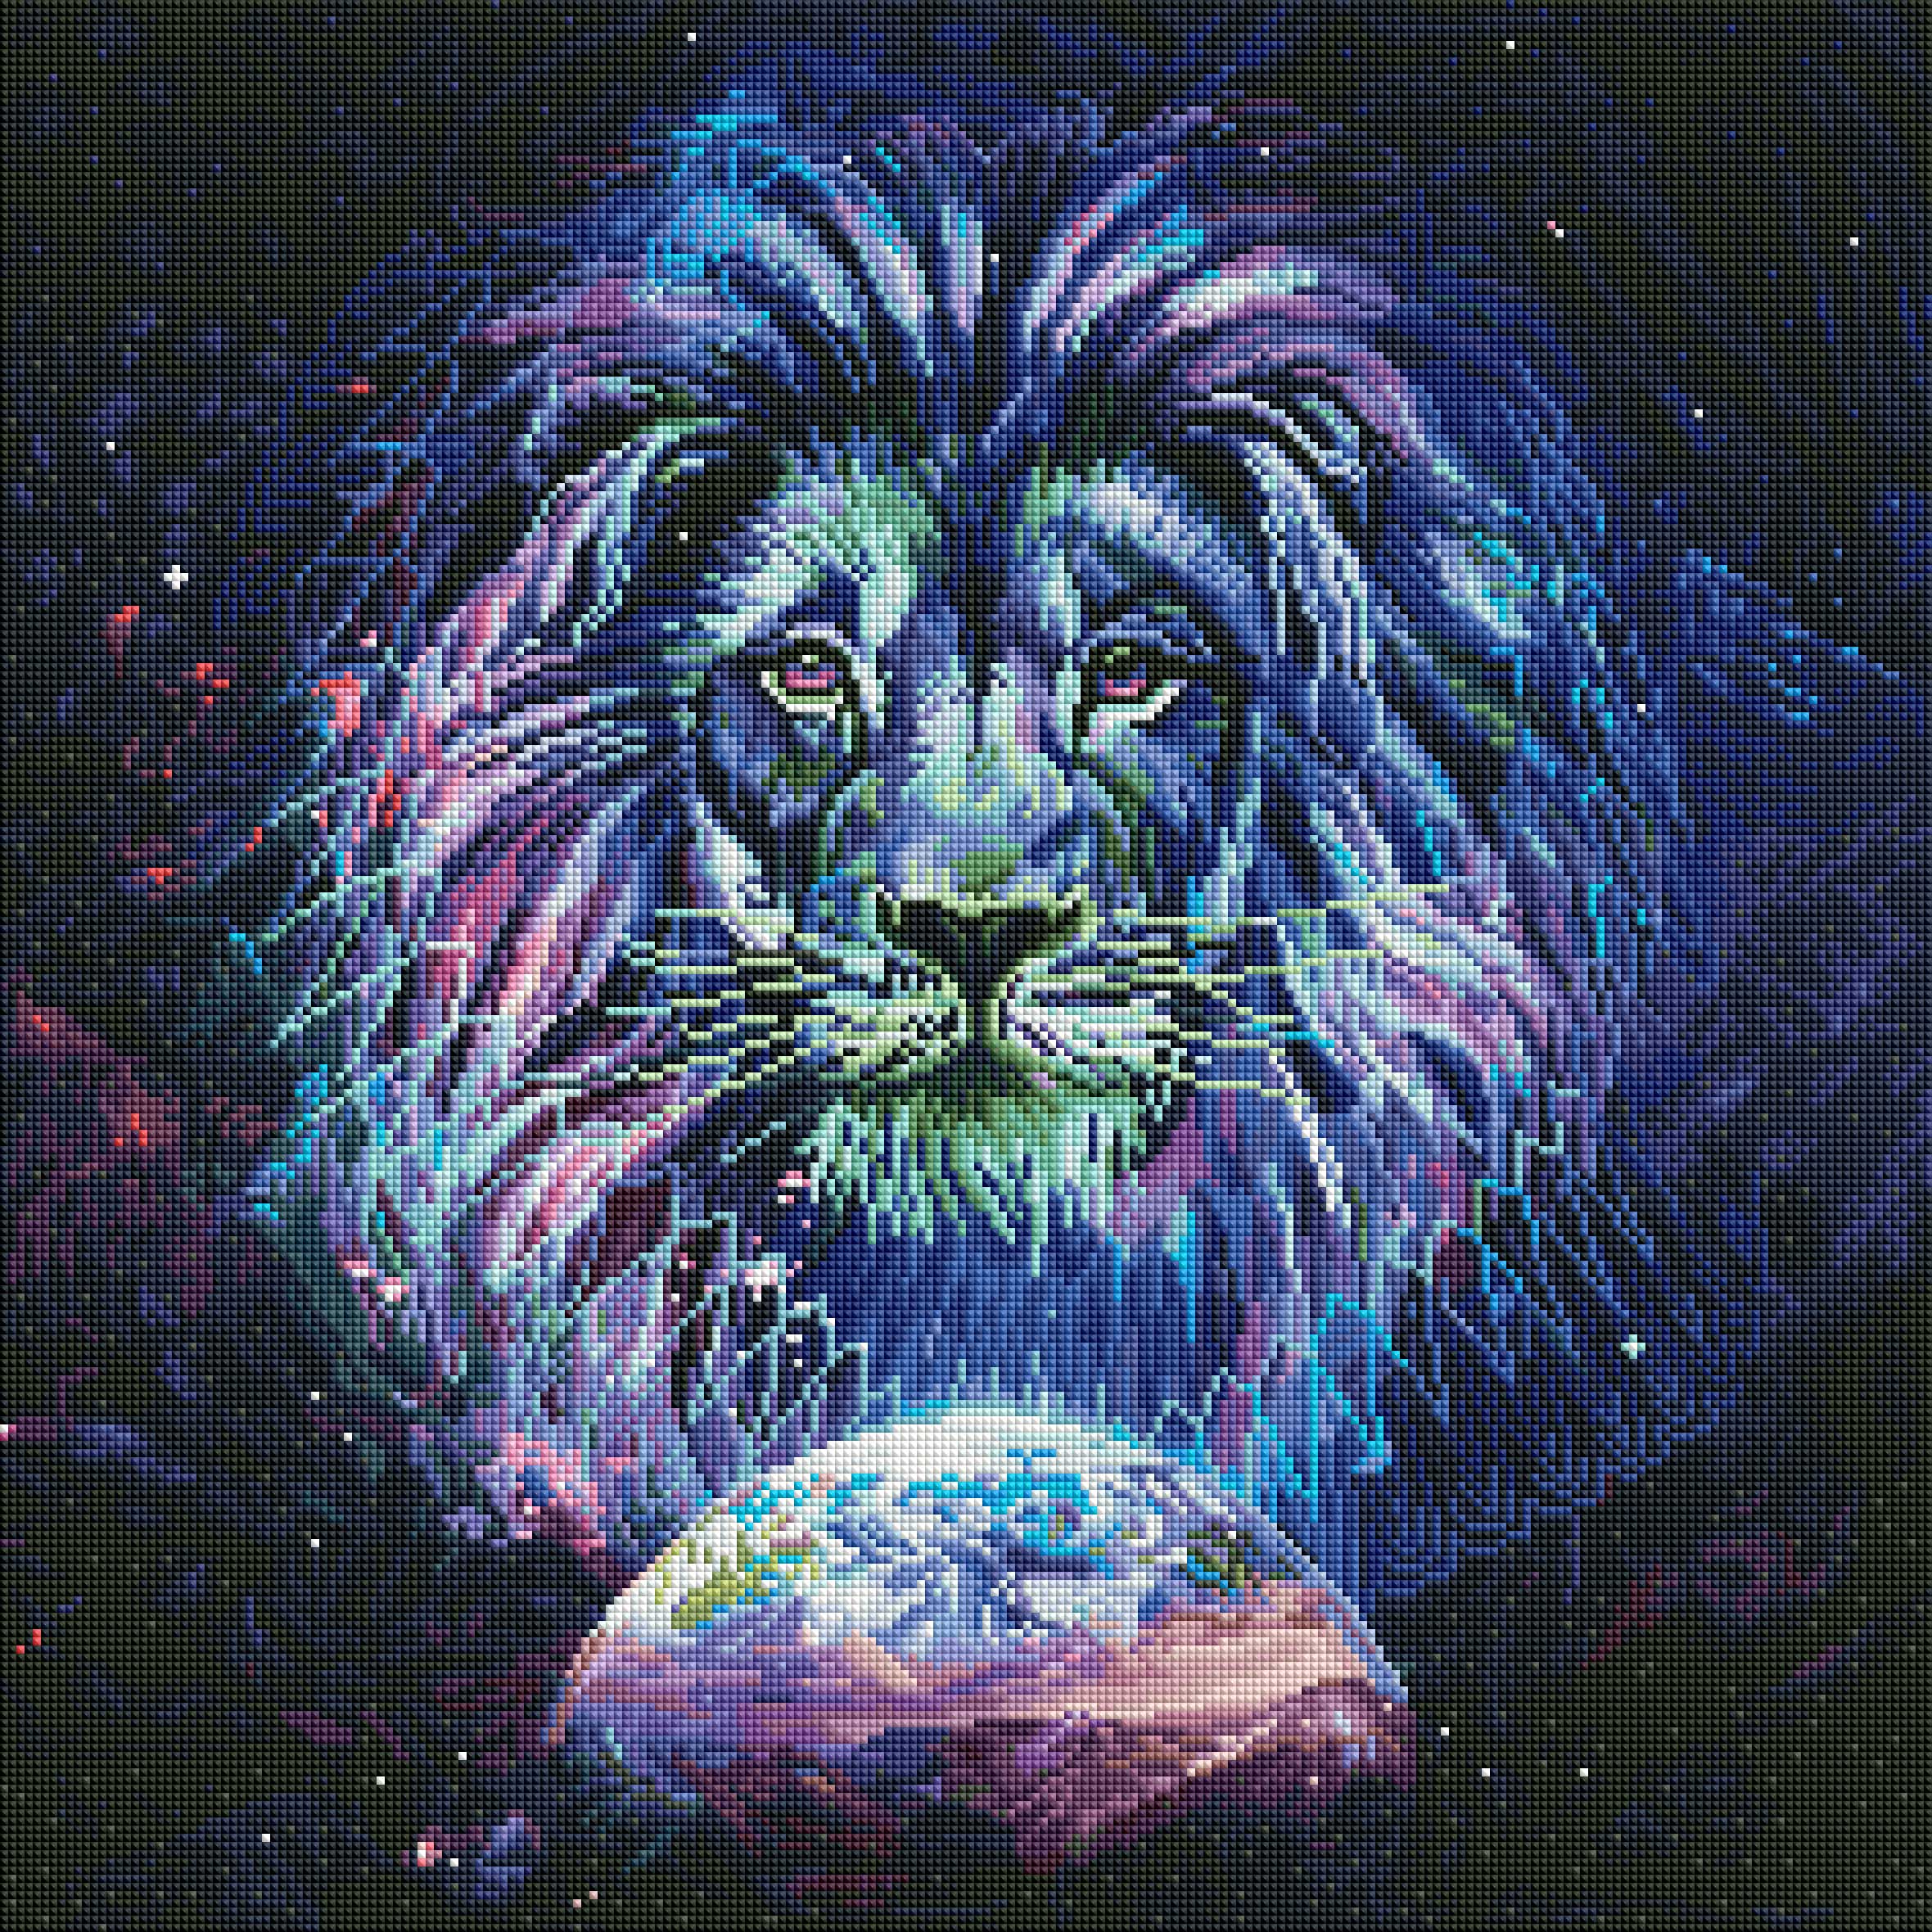 Psychedelic Lion